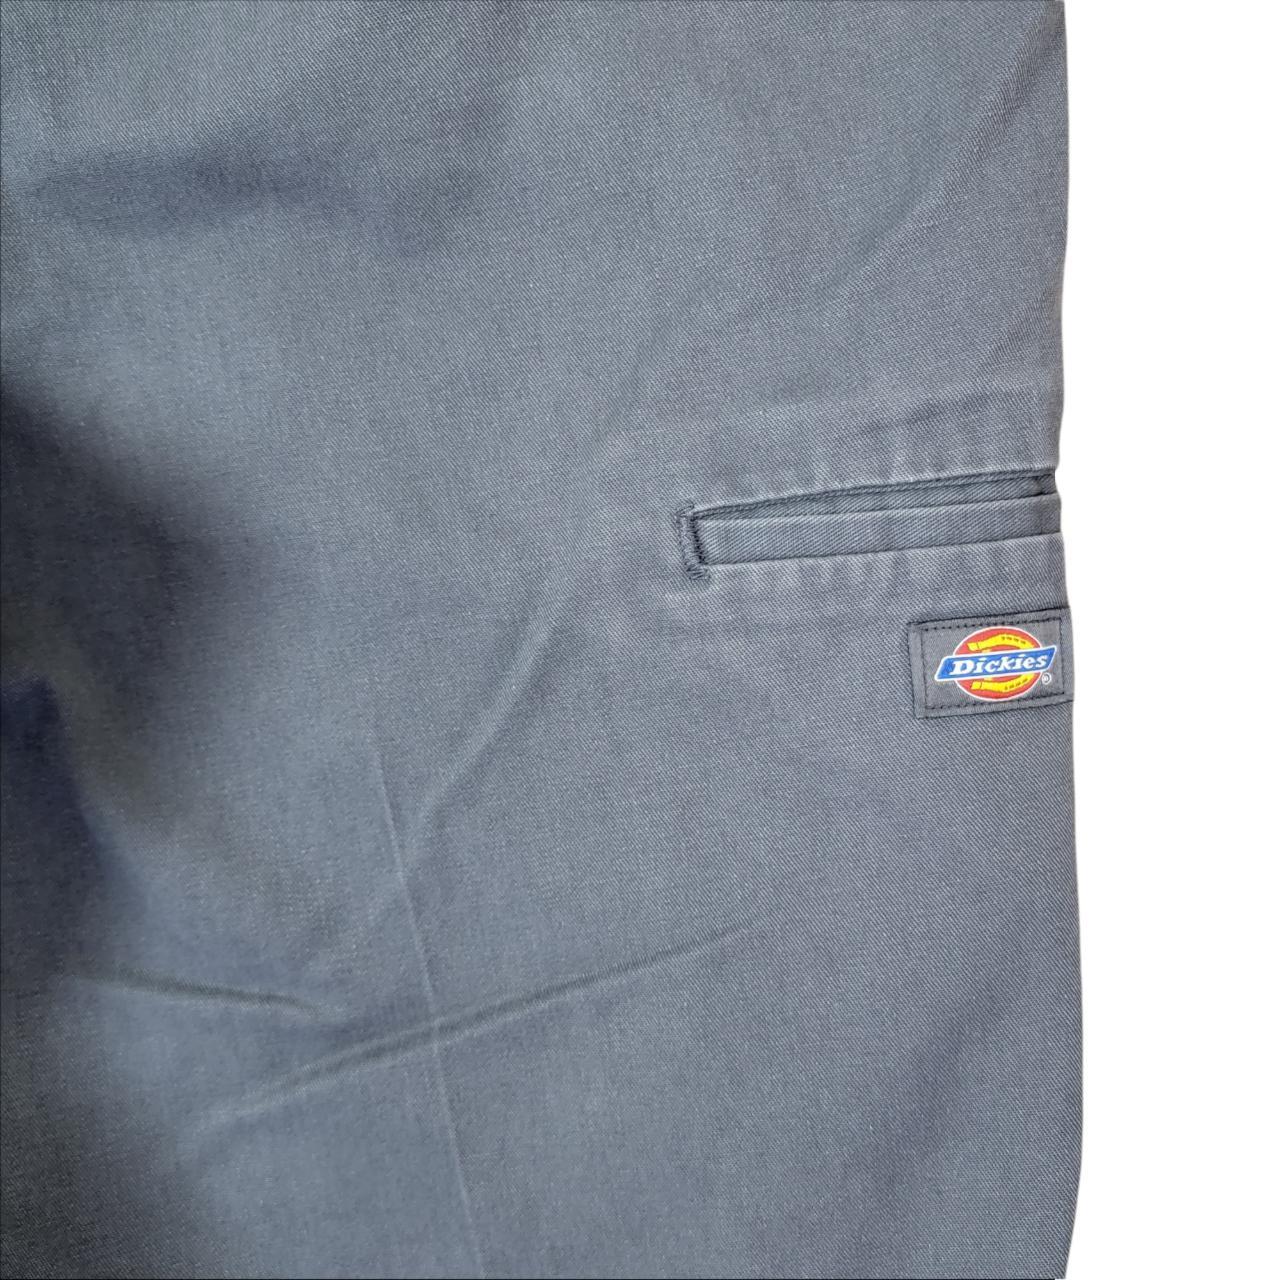 Product Image 3 - Dickies Gray Work Shorts 34

Brand: